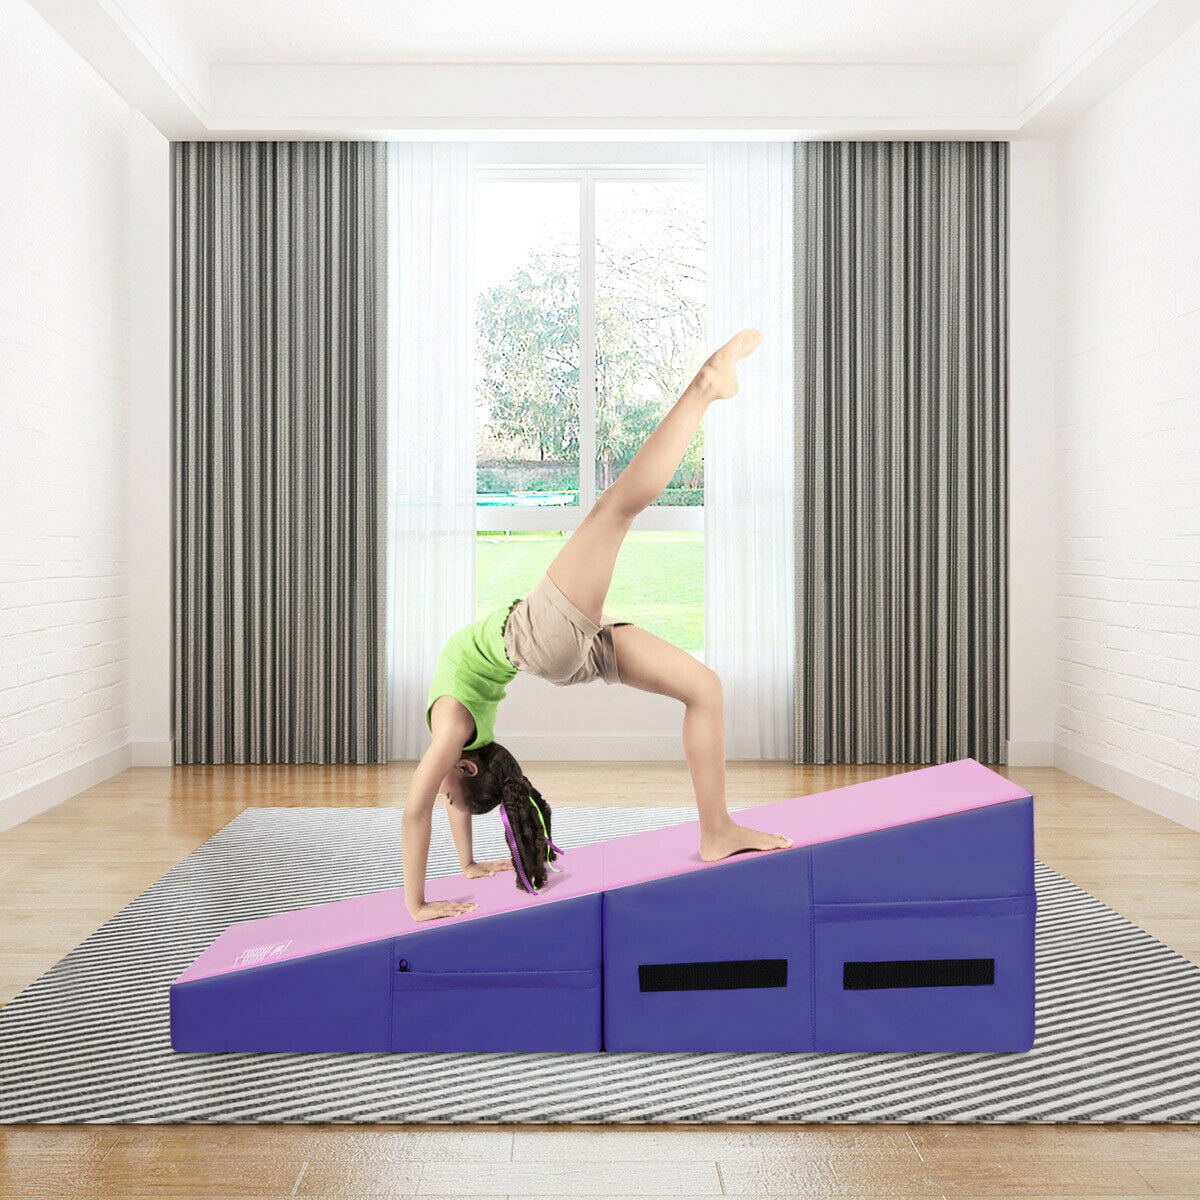 Martial Dance Yoga Stretch Training Practice Kids Girls Adult GYMAX Incline Gymnastic Mat Folding and Non-Folding 60”x30”x14” Tumbling Cheese Wedge Mat for Gymnastic Cheerleading 